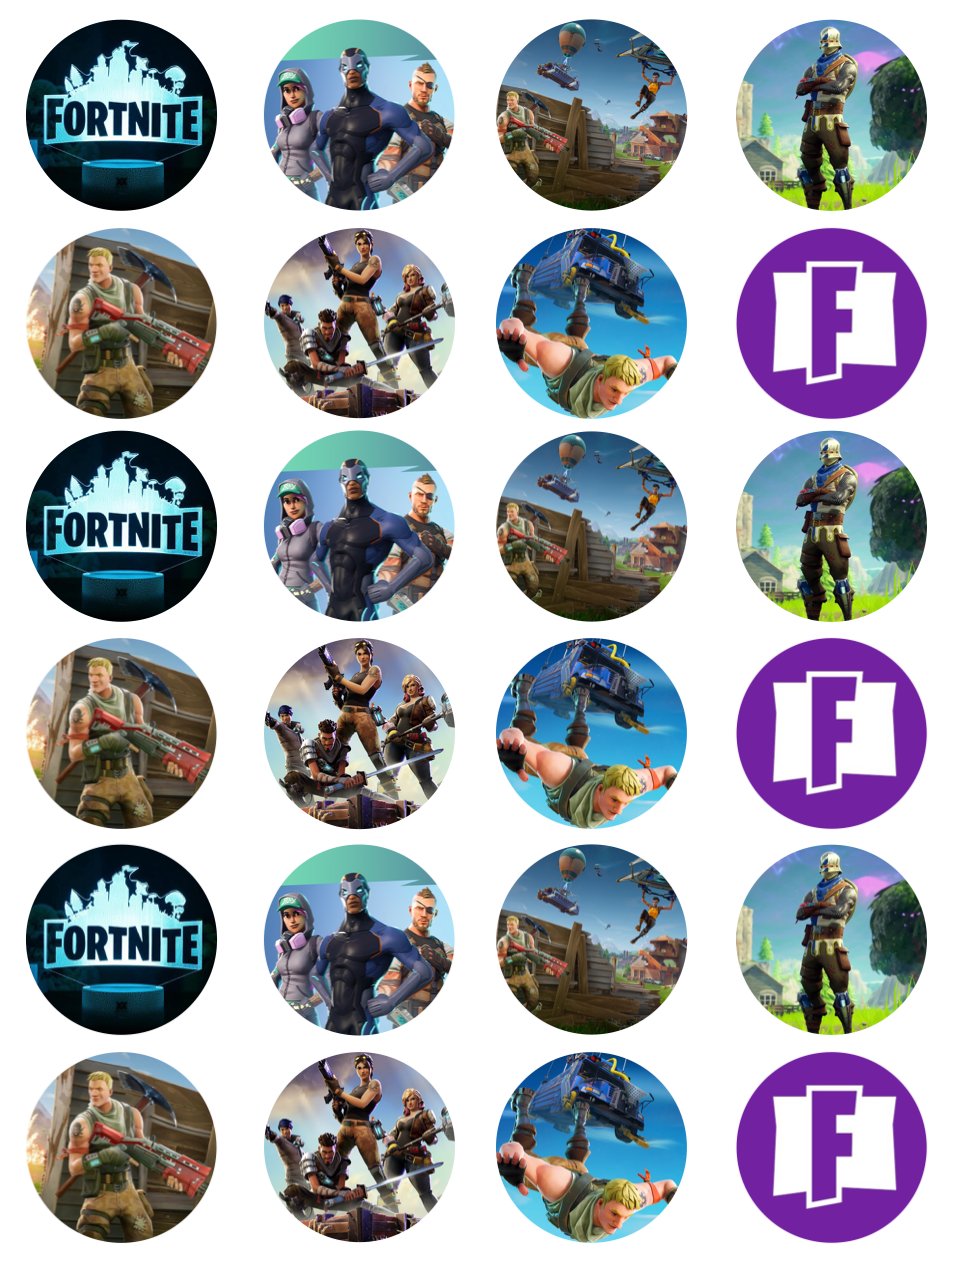 Fortnite #1 Cupcake Edible Icing Image Toppers